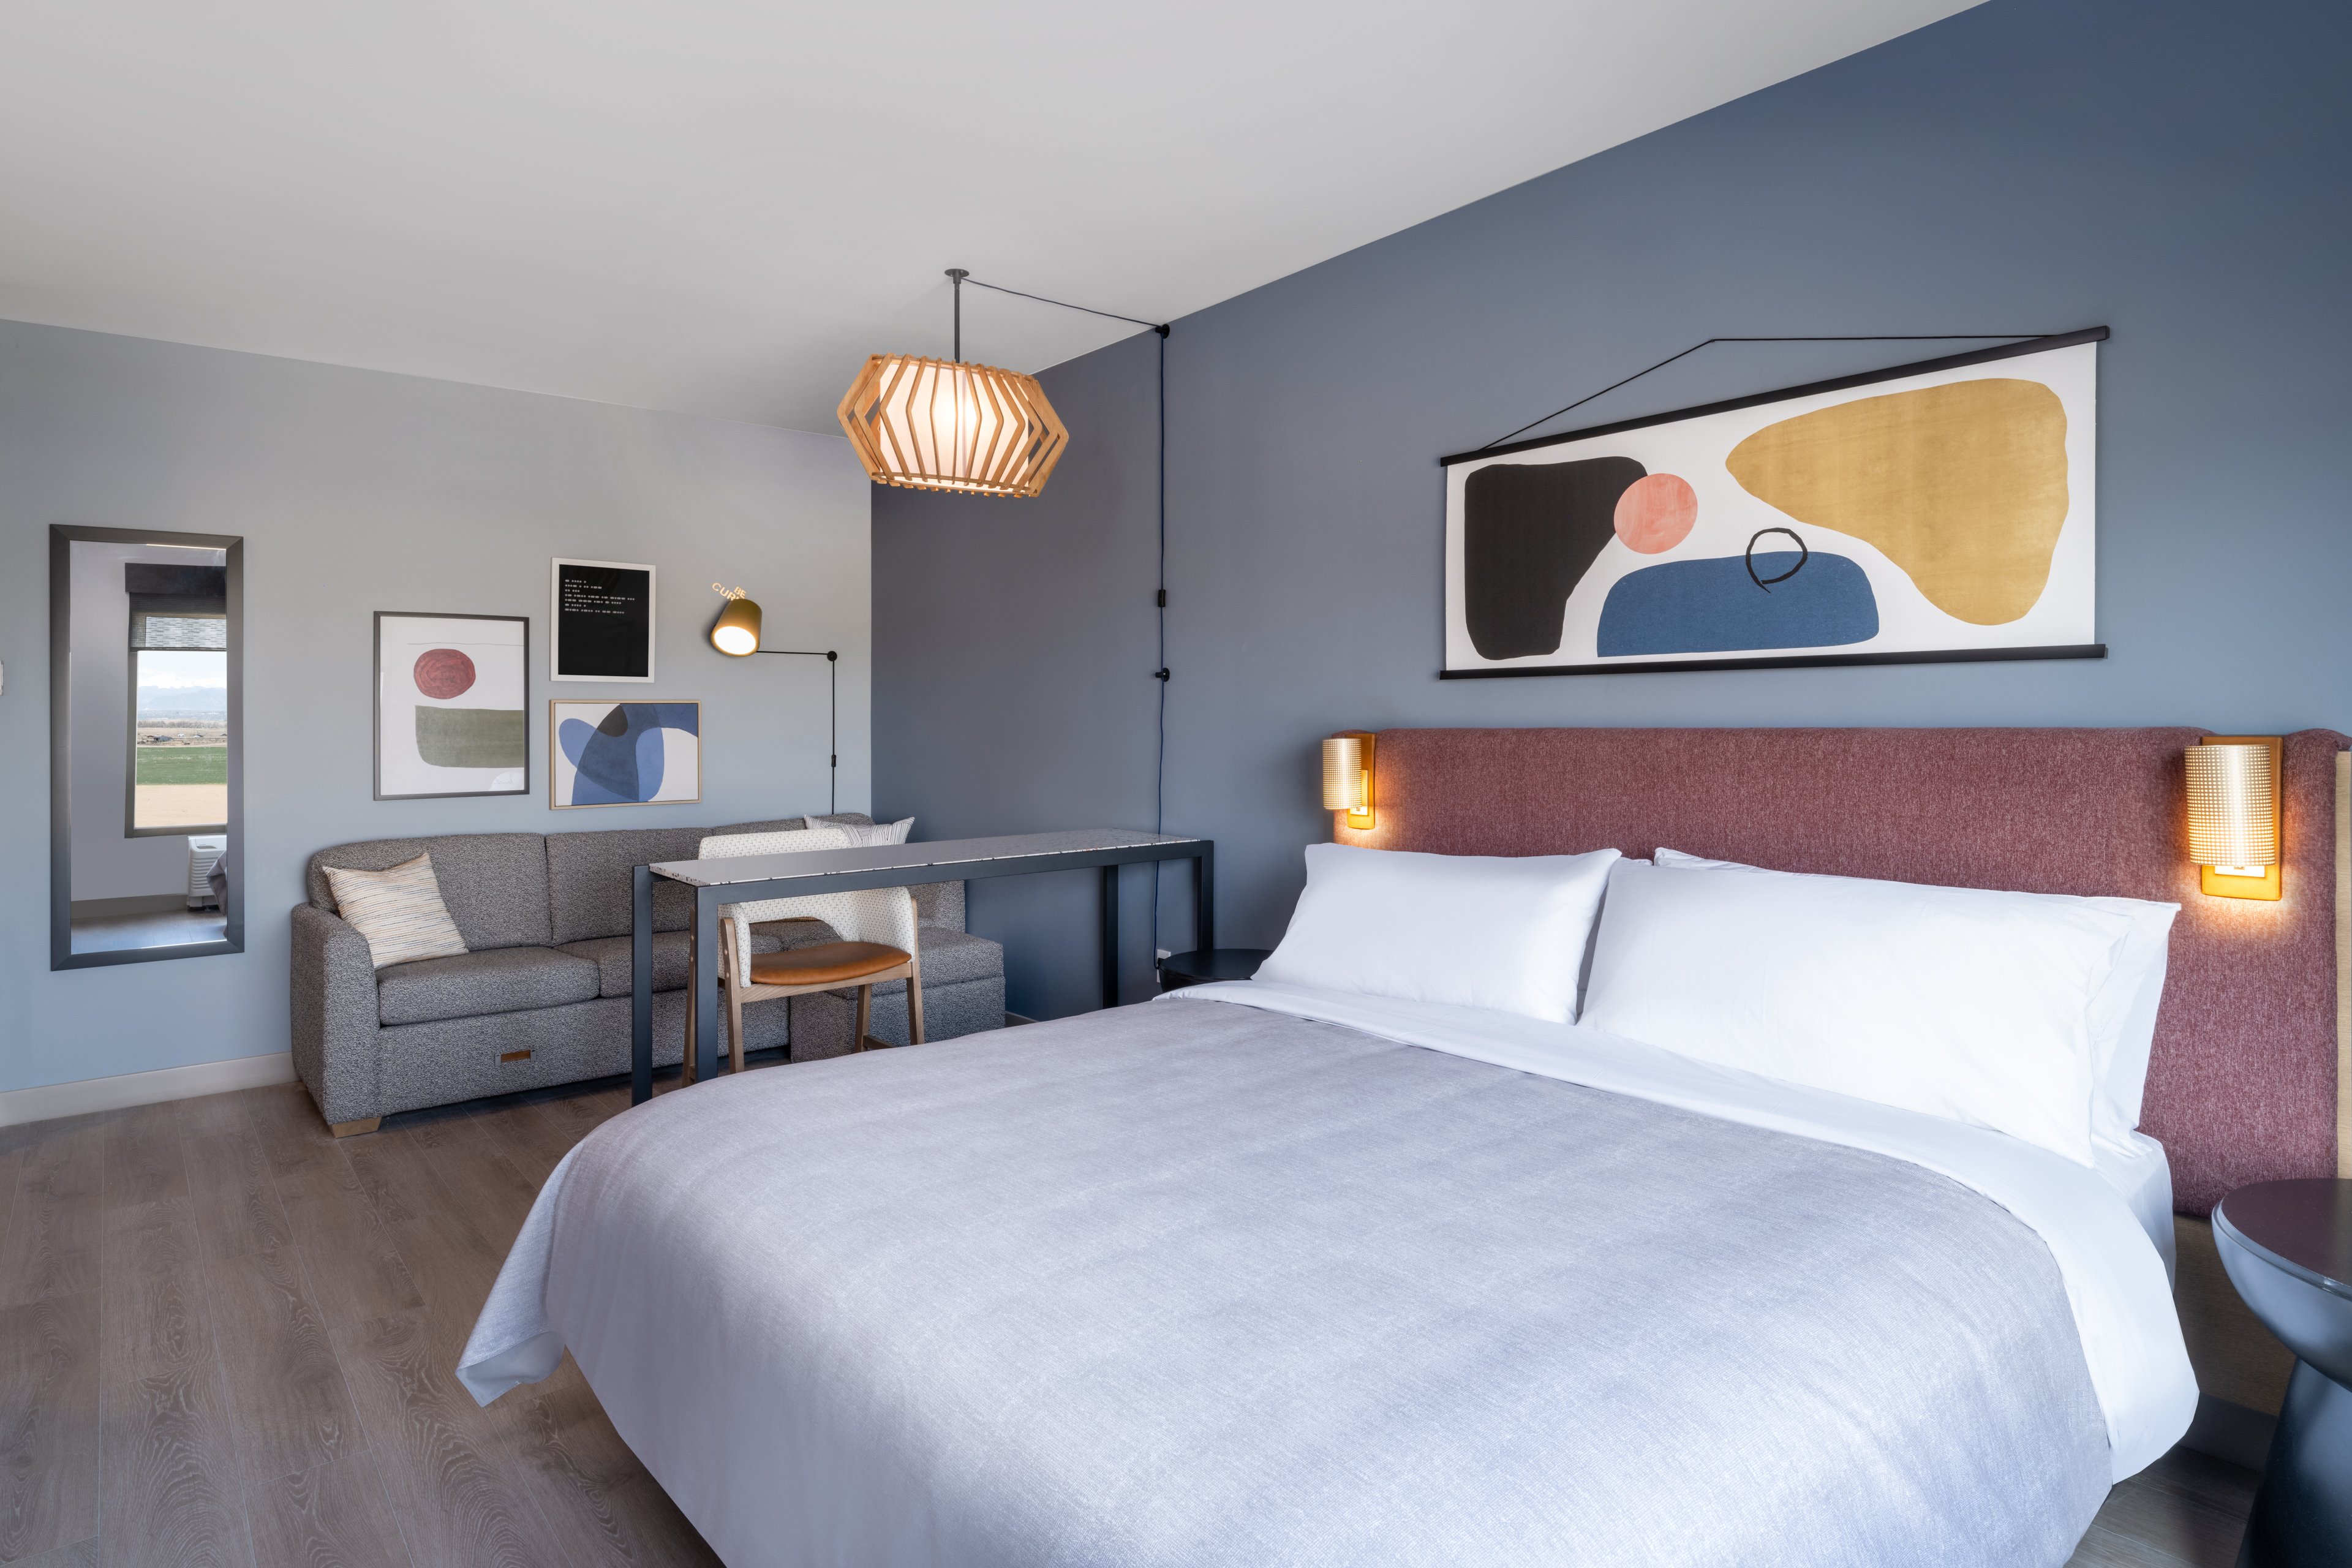 Our flexible suites are perfect for work, play and relaxing